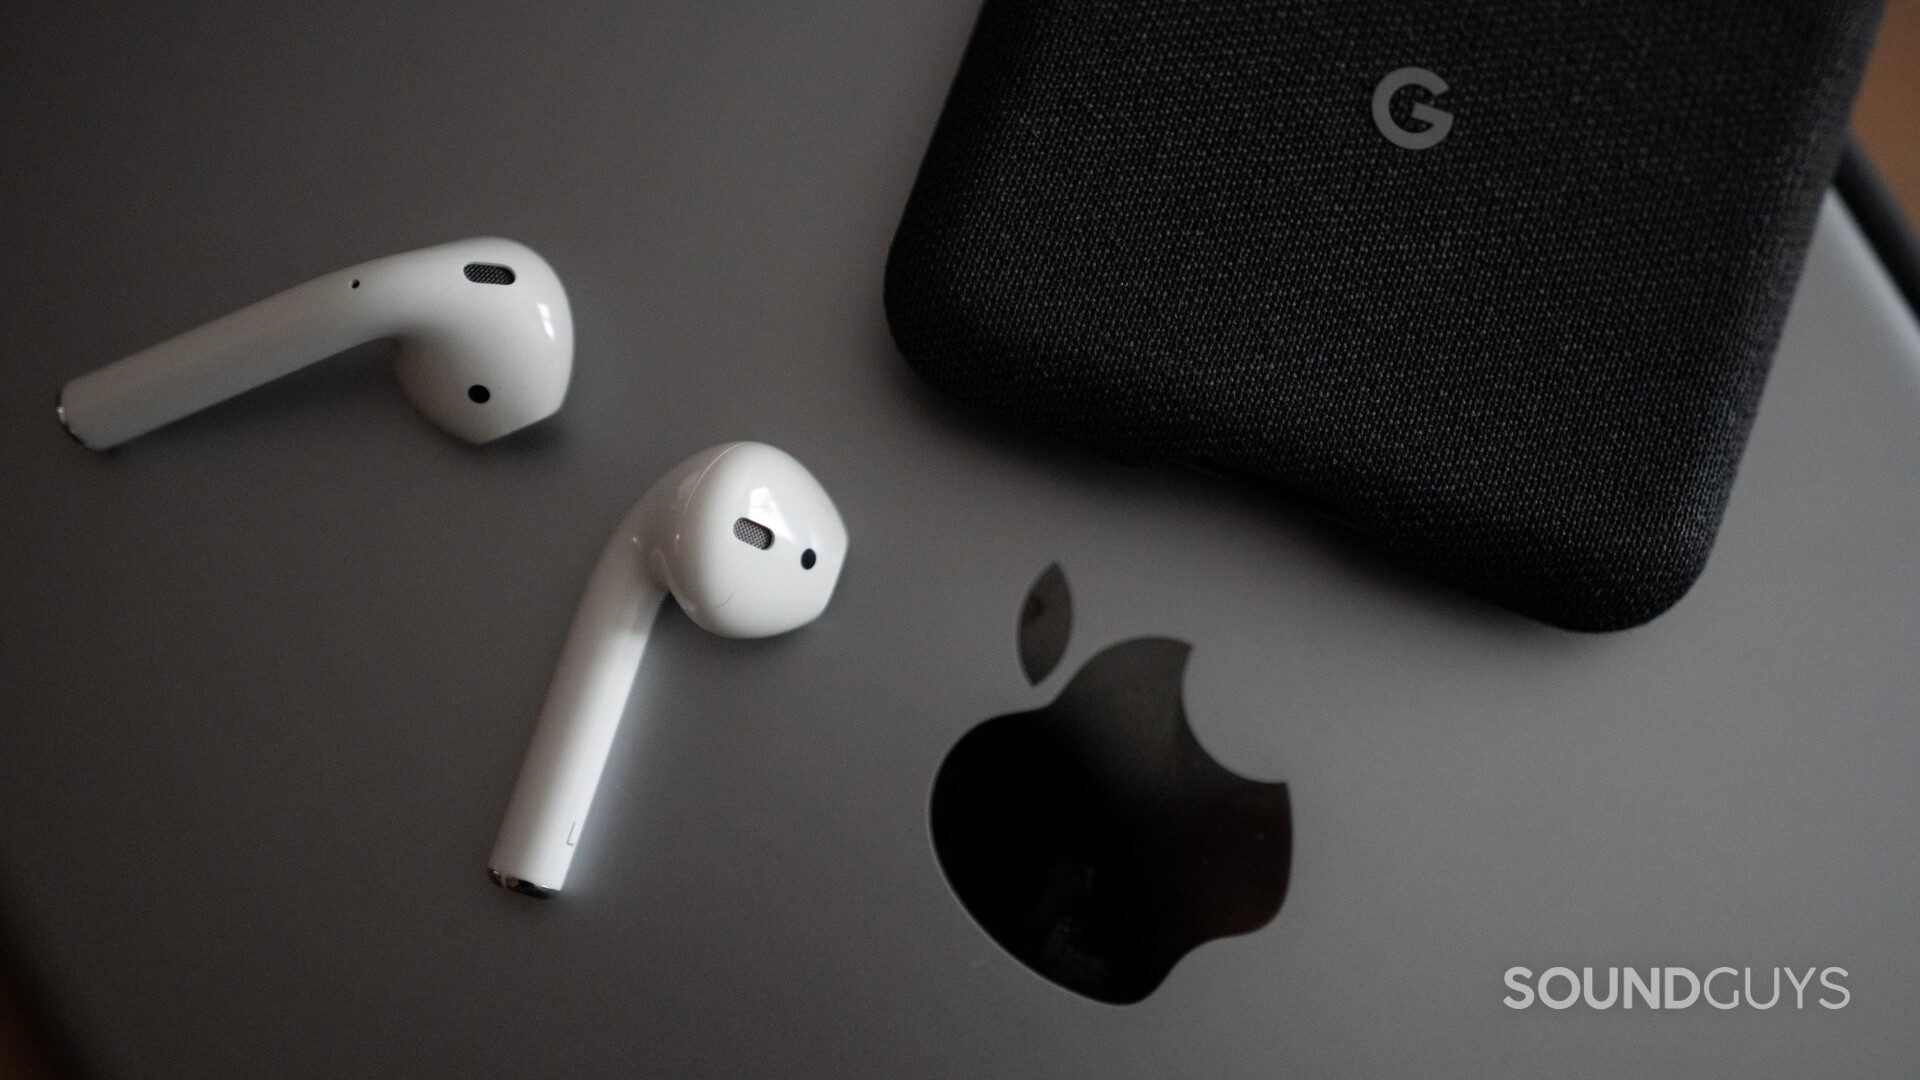 The AirPods (2nd generation) on top of an iPad and next to the Google Pixel 3.